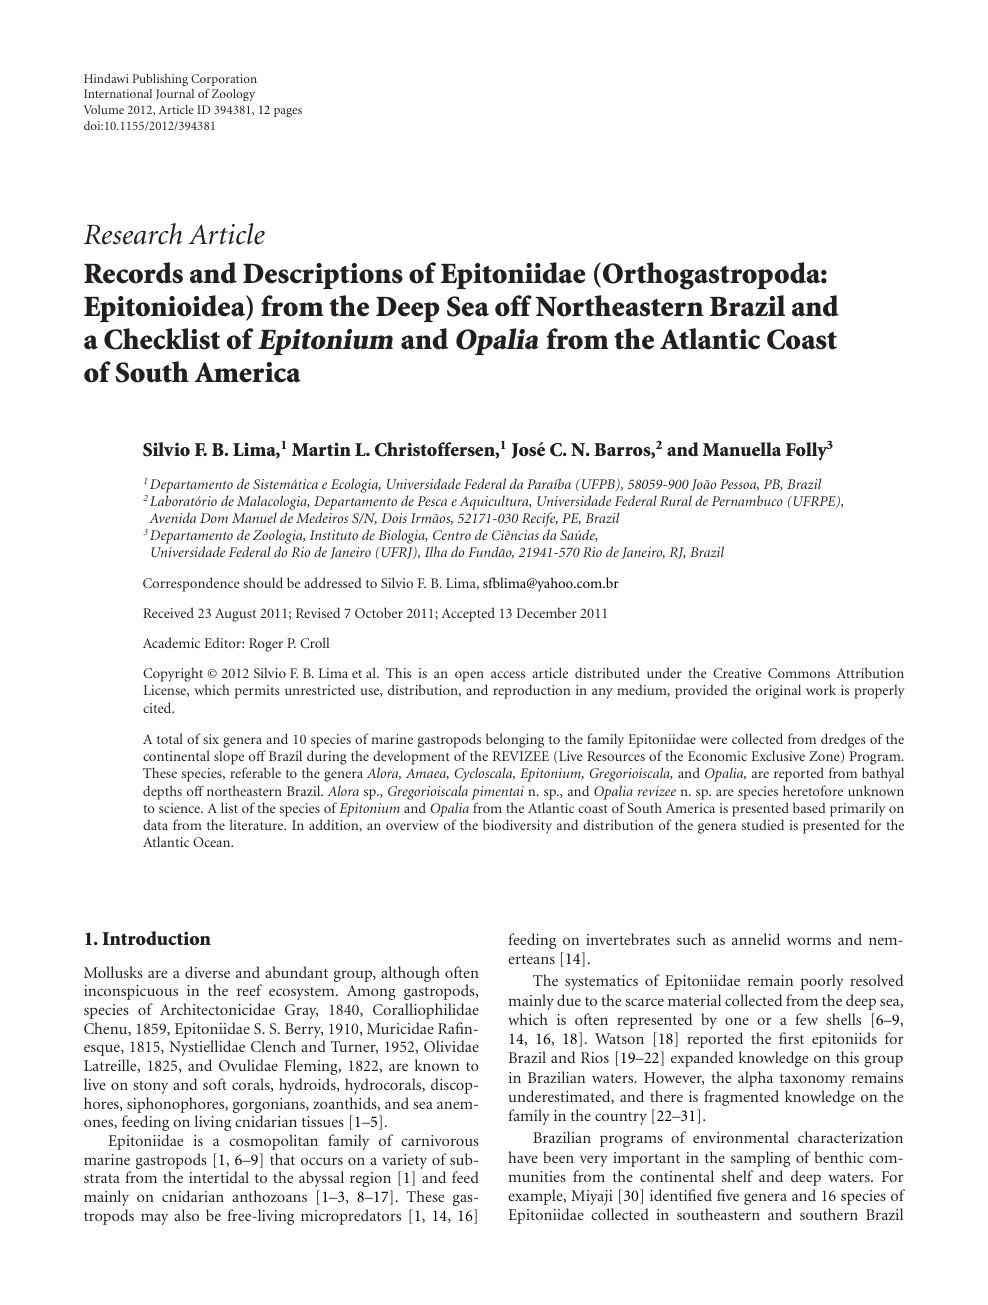 Records And Descriptions Of Epitoniidae Orthogastropoda Epitonioidea From The Deep Sea Off Northeastern Brazil And A Checklist Of Epitonium And Opalia From The Atlantic Coast Of South America Topic Of Research